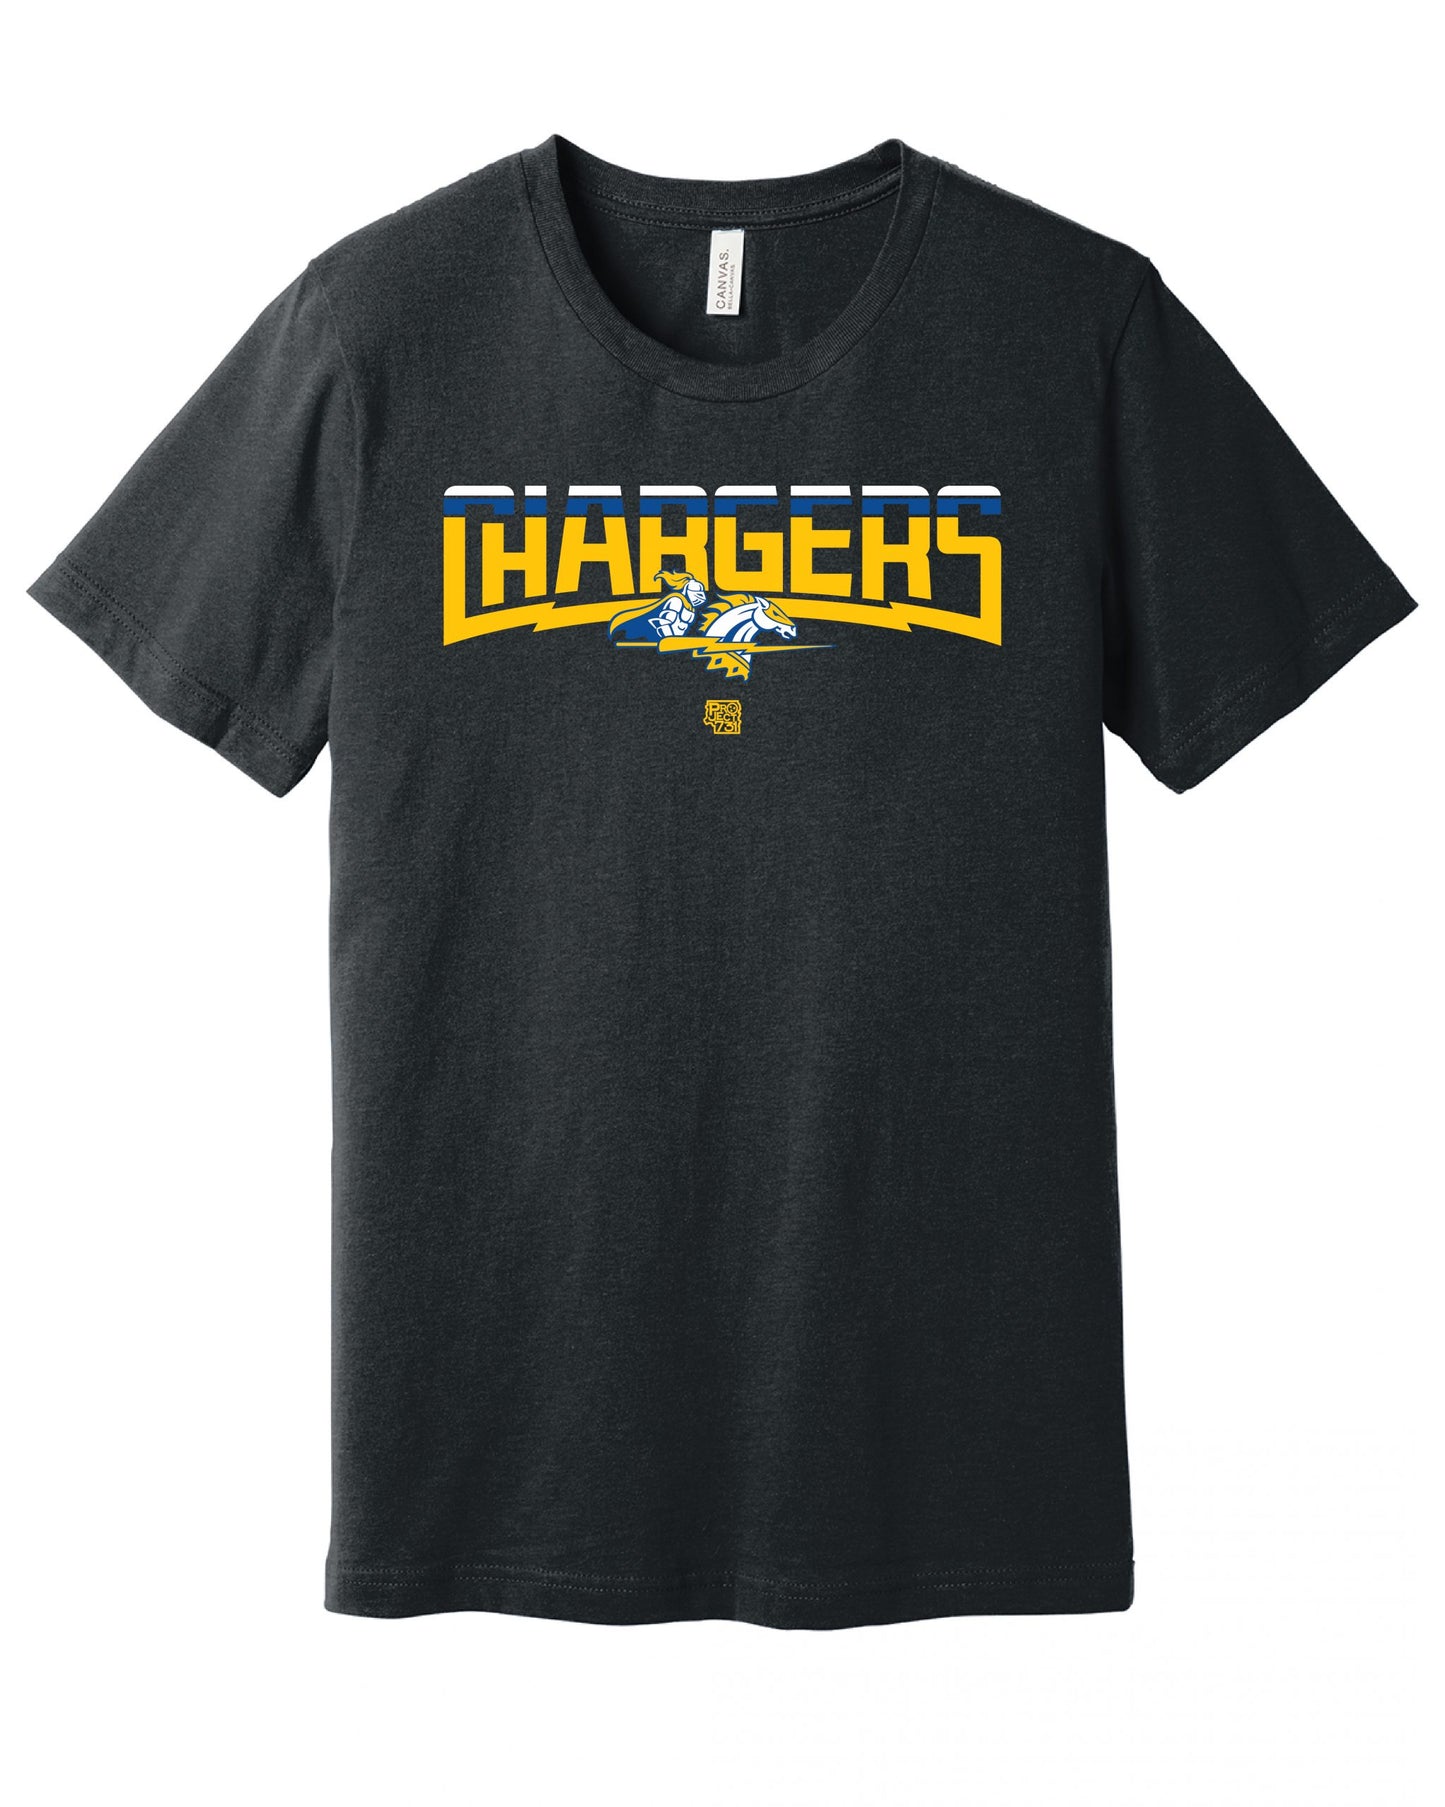 Chargers Bolted T-shirt